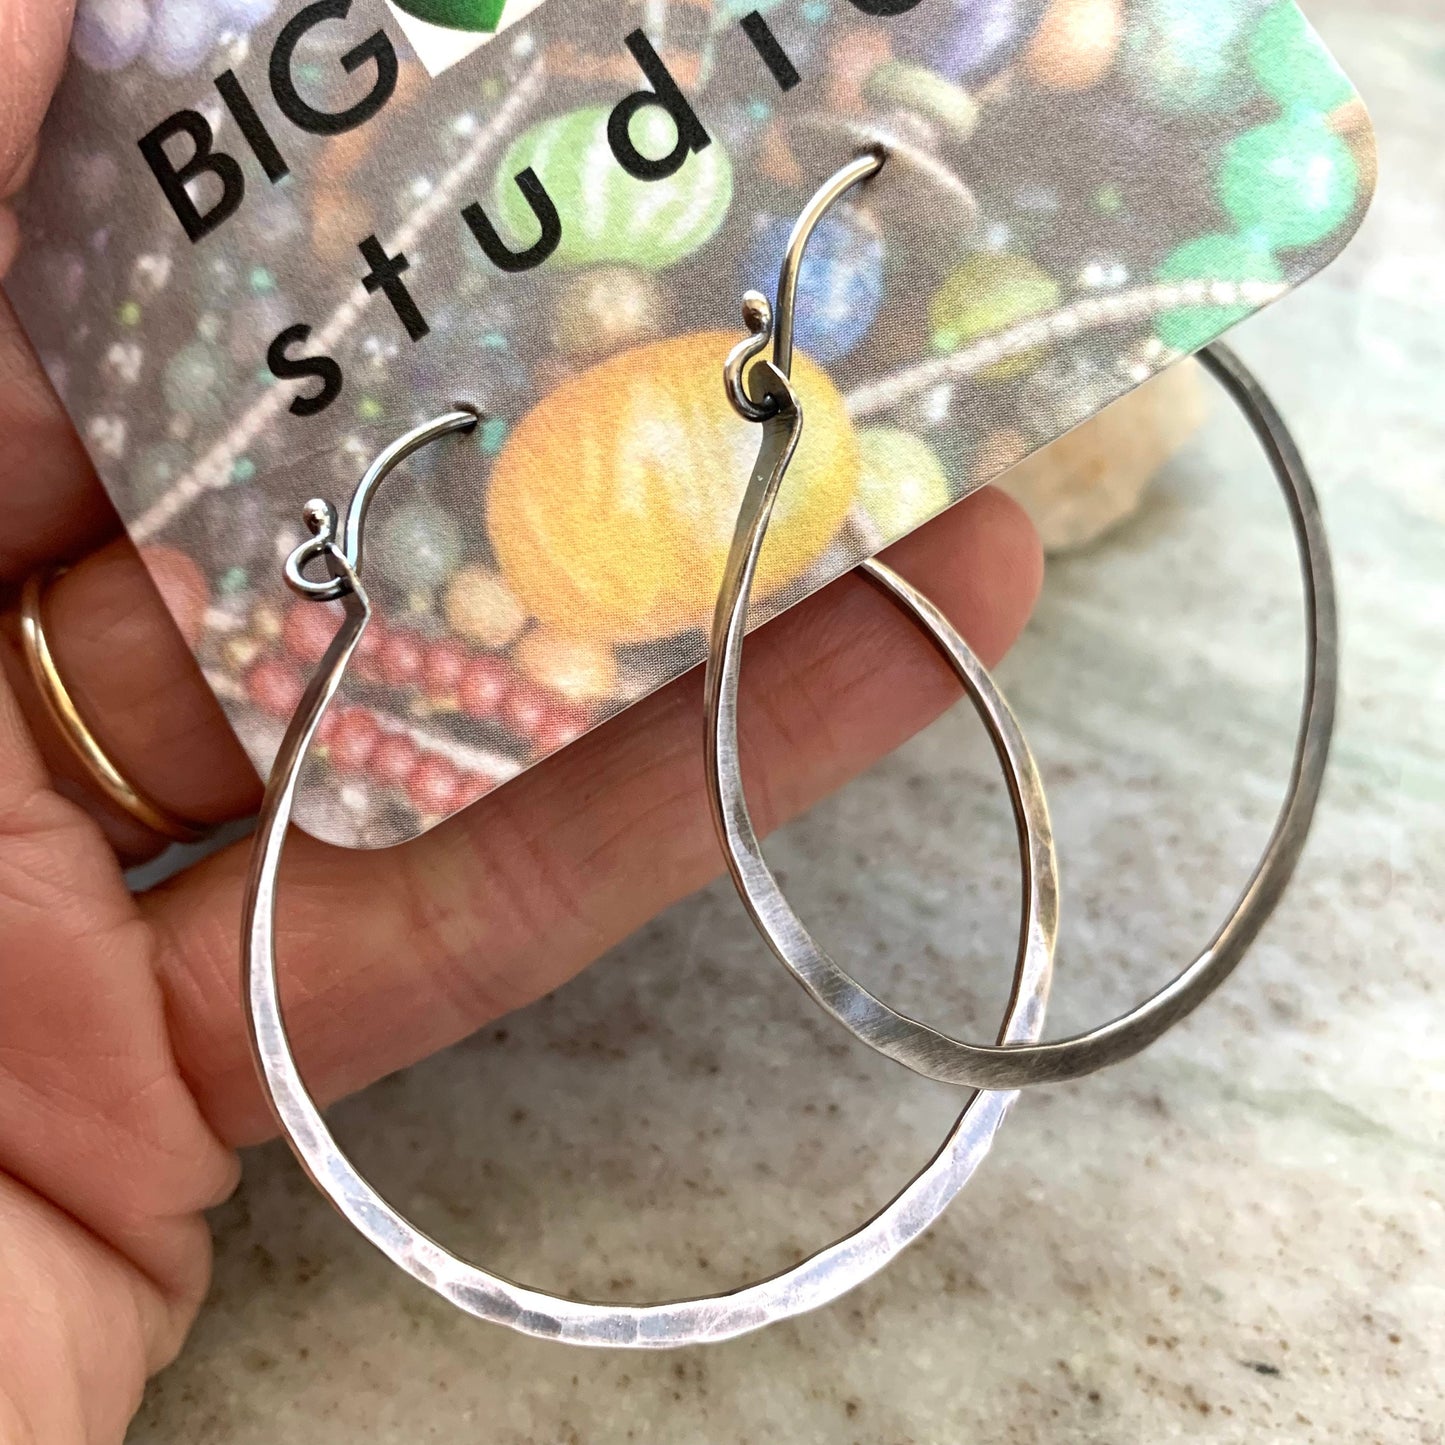 Silver hoop earrings - small, medium or large hoops - lightweight sterling hoops - hand forged wire - gifts for moms - boho - yoga lifestyle